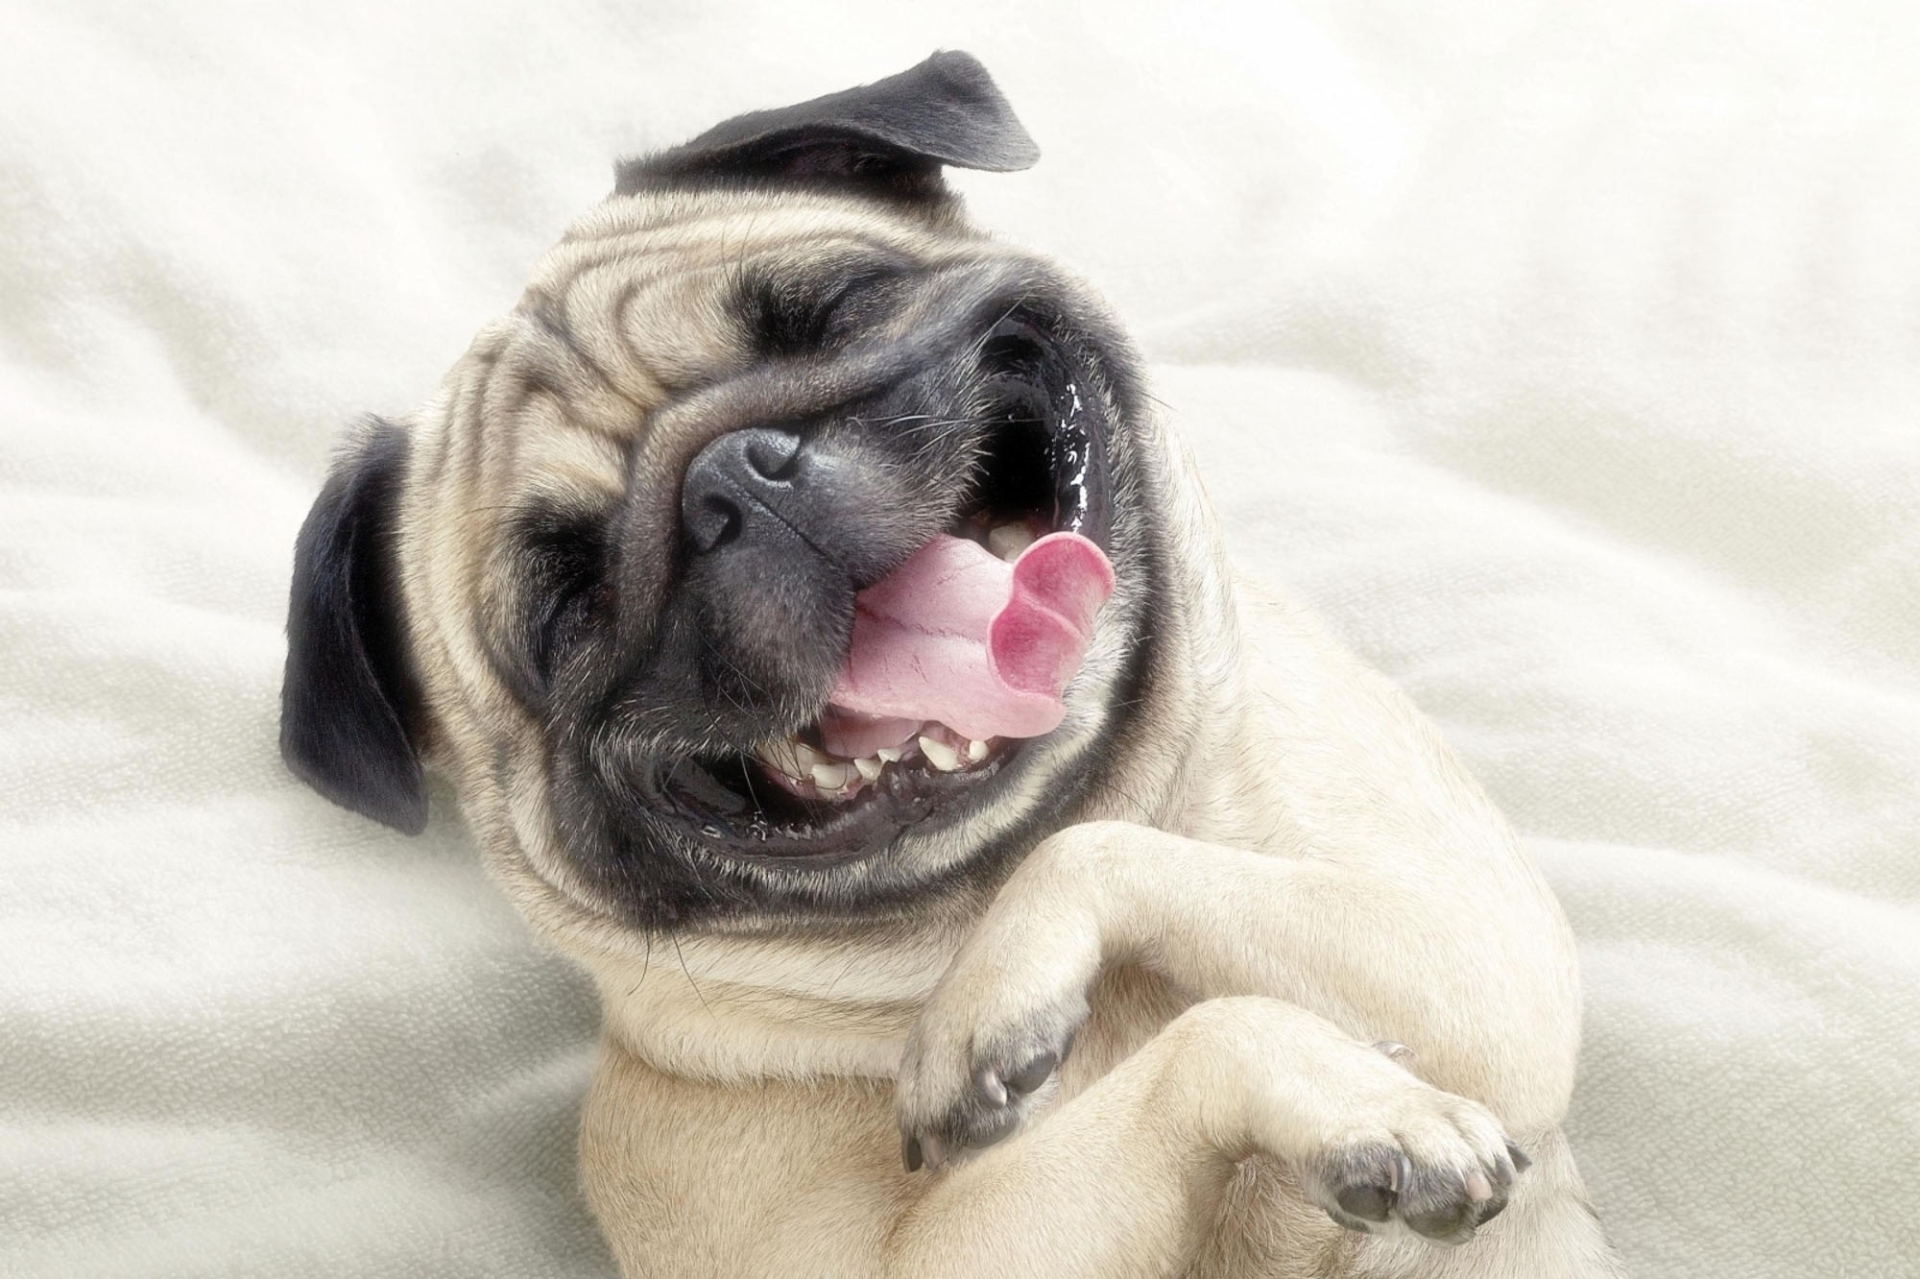 HD wallpaper muzzle, animals, dog, protruding tongue, tongue stuck out, pug, satisfied, content